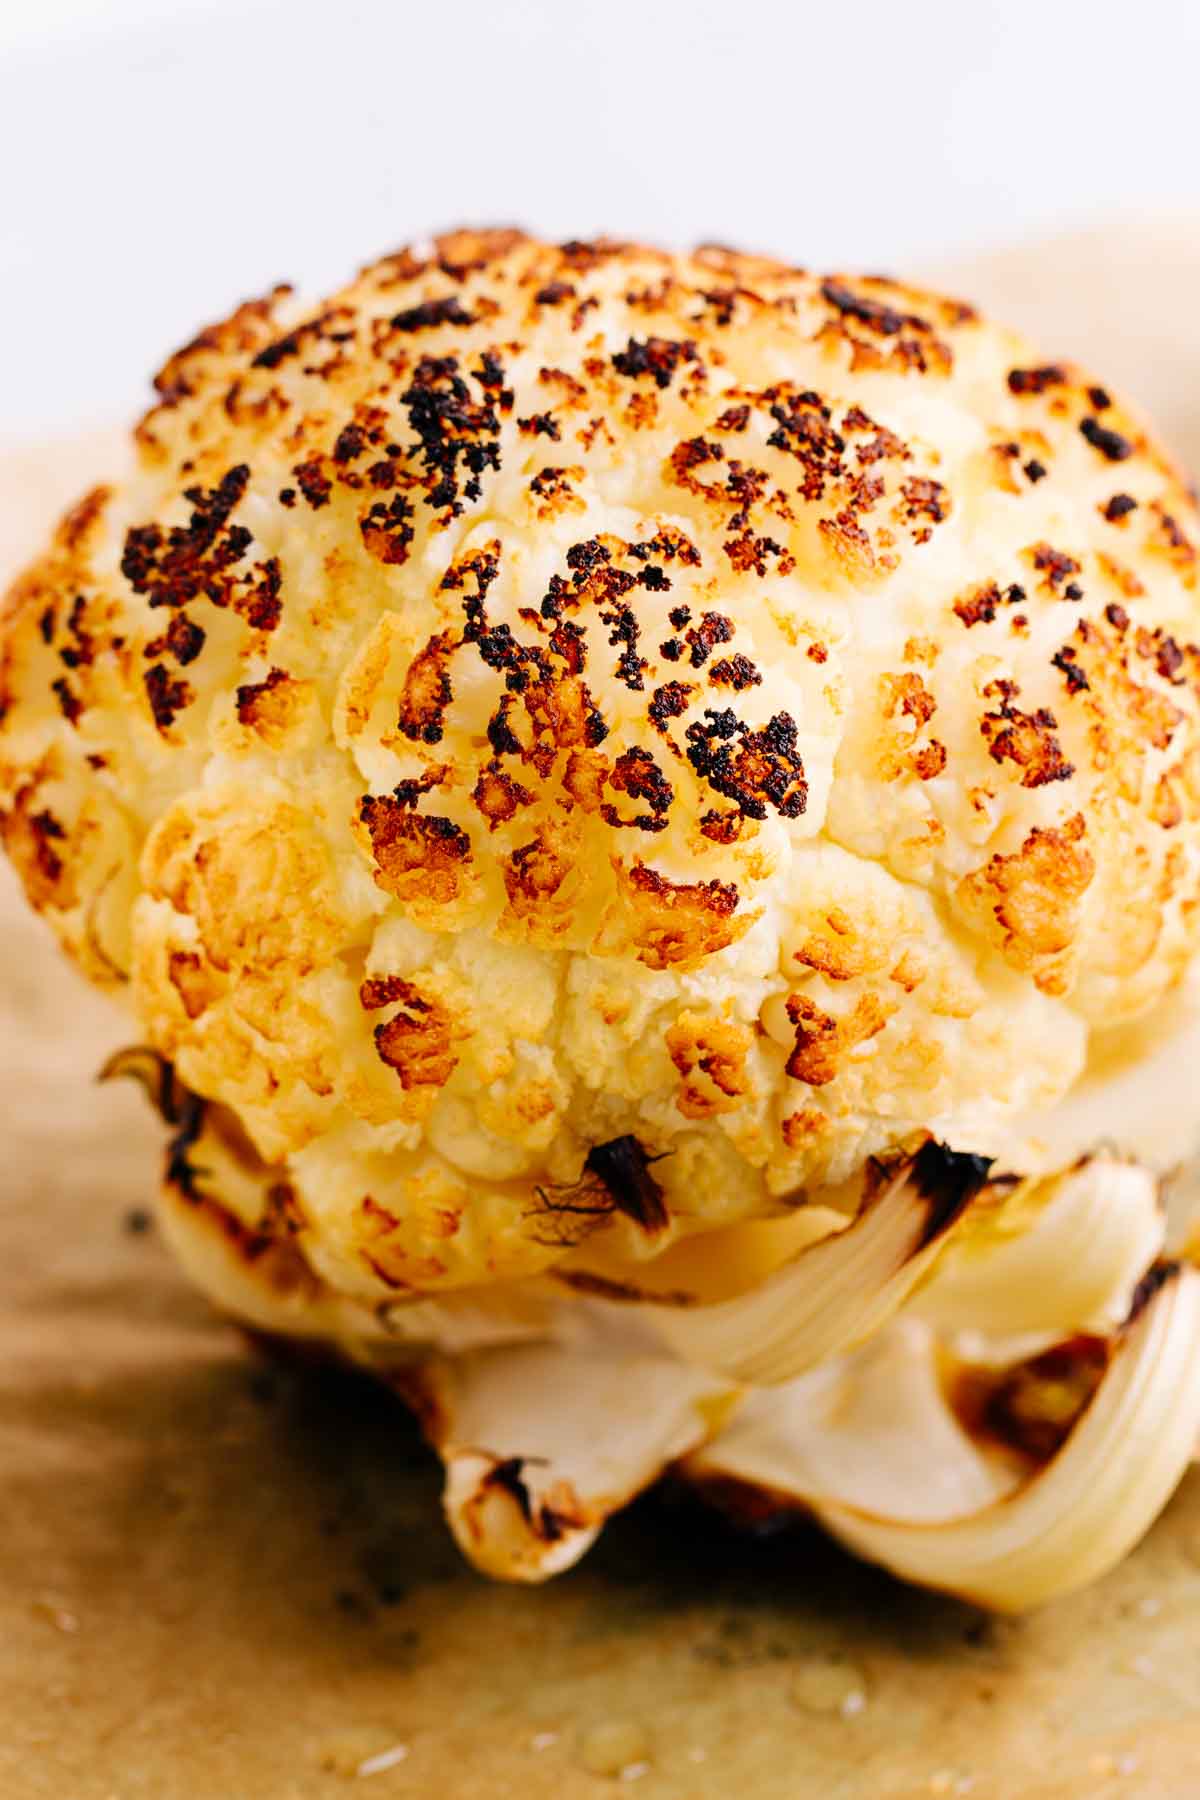 Brown parchment paper with a whole head of fully brown and black roasted cauliflower on it in front of a white tiled backdrop.